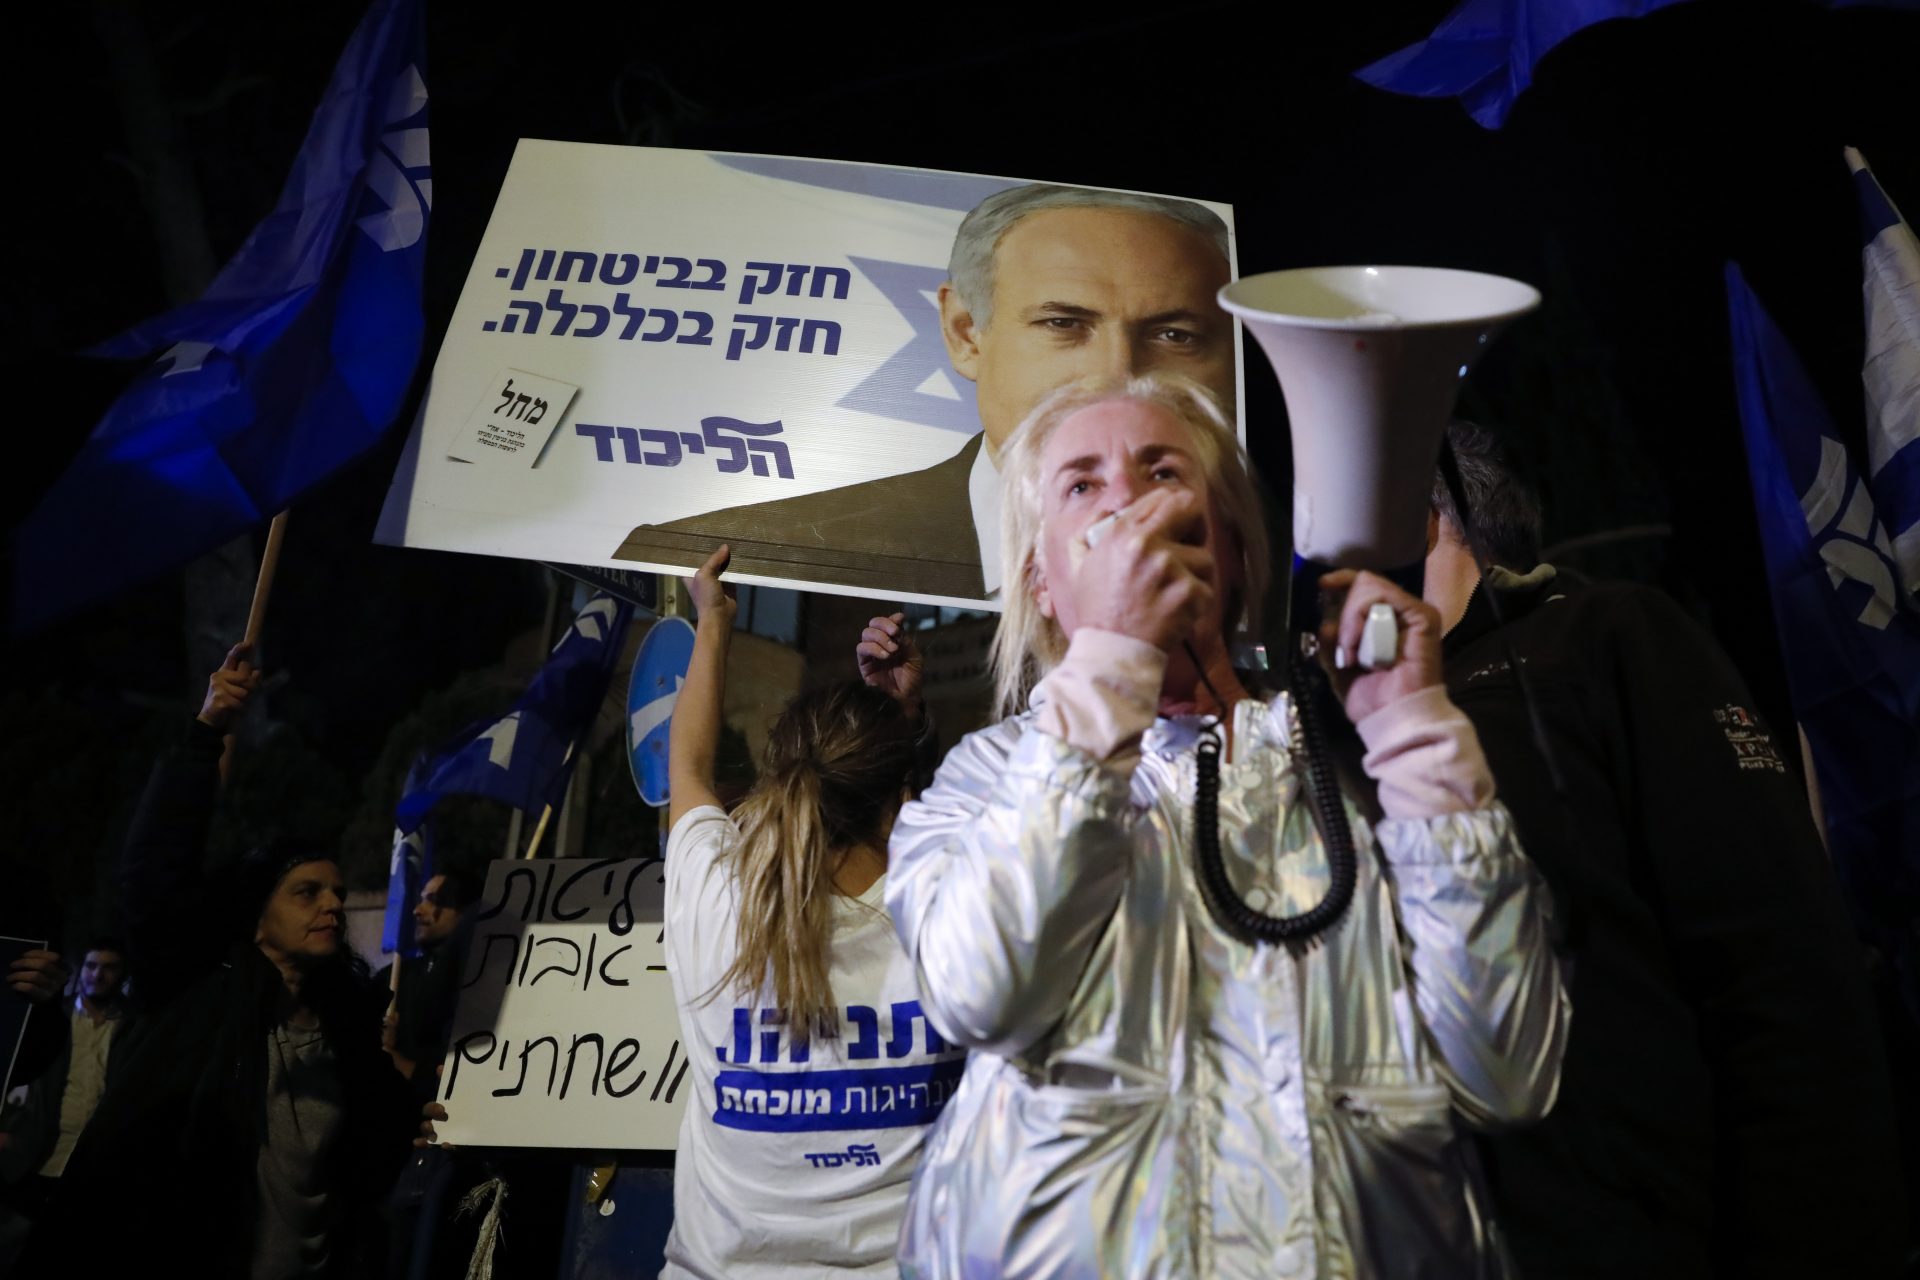 Supporters of Israeli Prime Minister Benjamin Netanyahu gather outside his residence in Jerusalem, Thursday, Nov. 21, 2019. Israel's attorney general charged Netanyahu with fraud, breach of trust and accepting bribes in three different scandals. It is the first time a sitting Israeli prime minister has been charged with a crime.